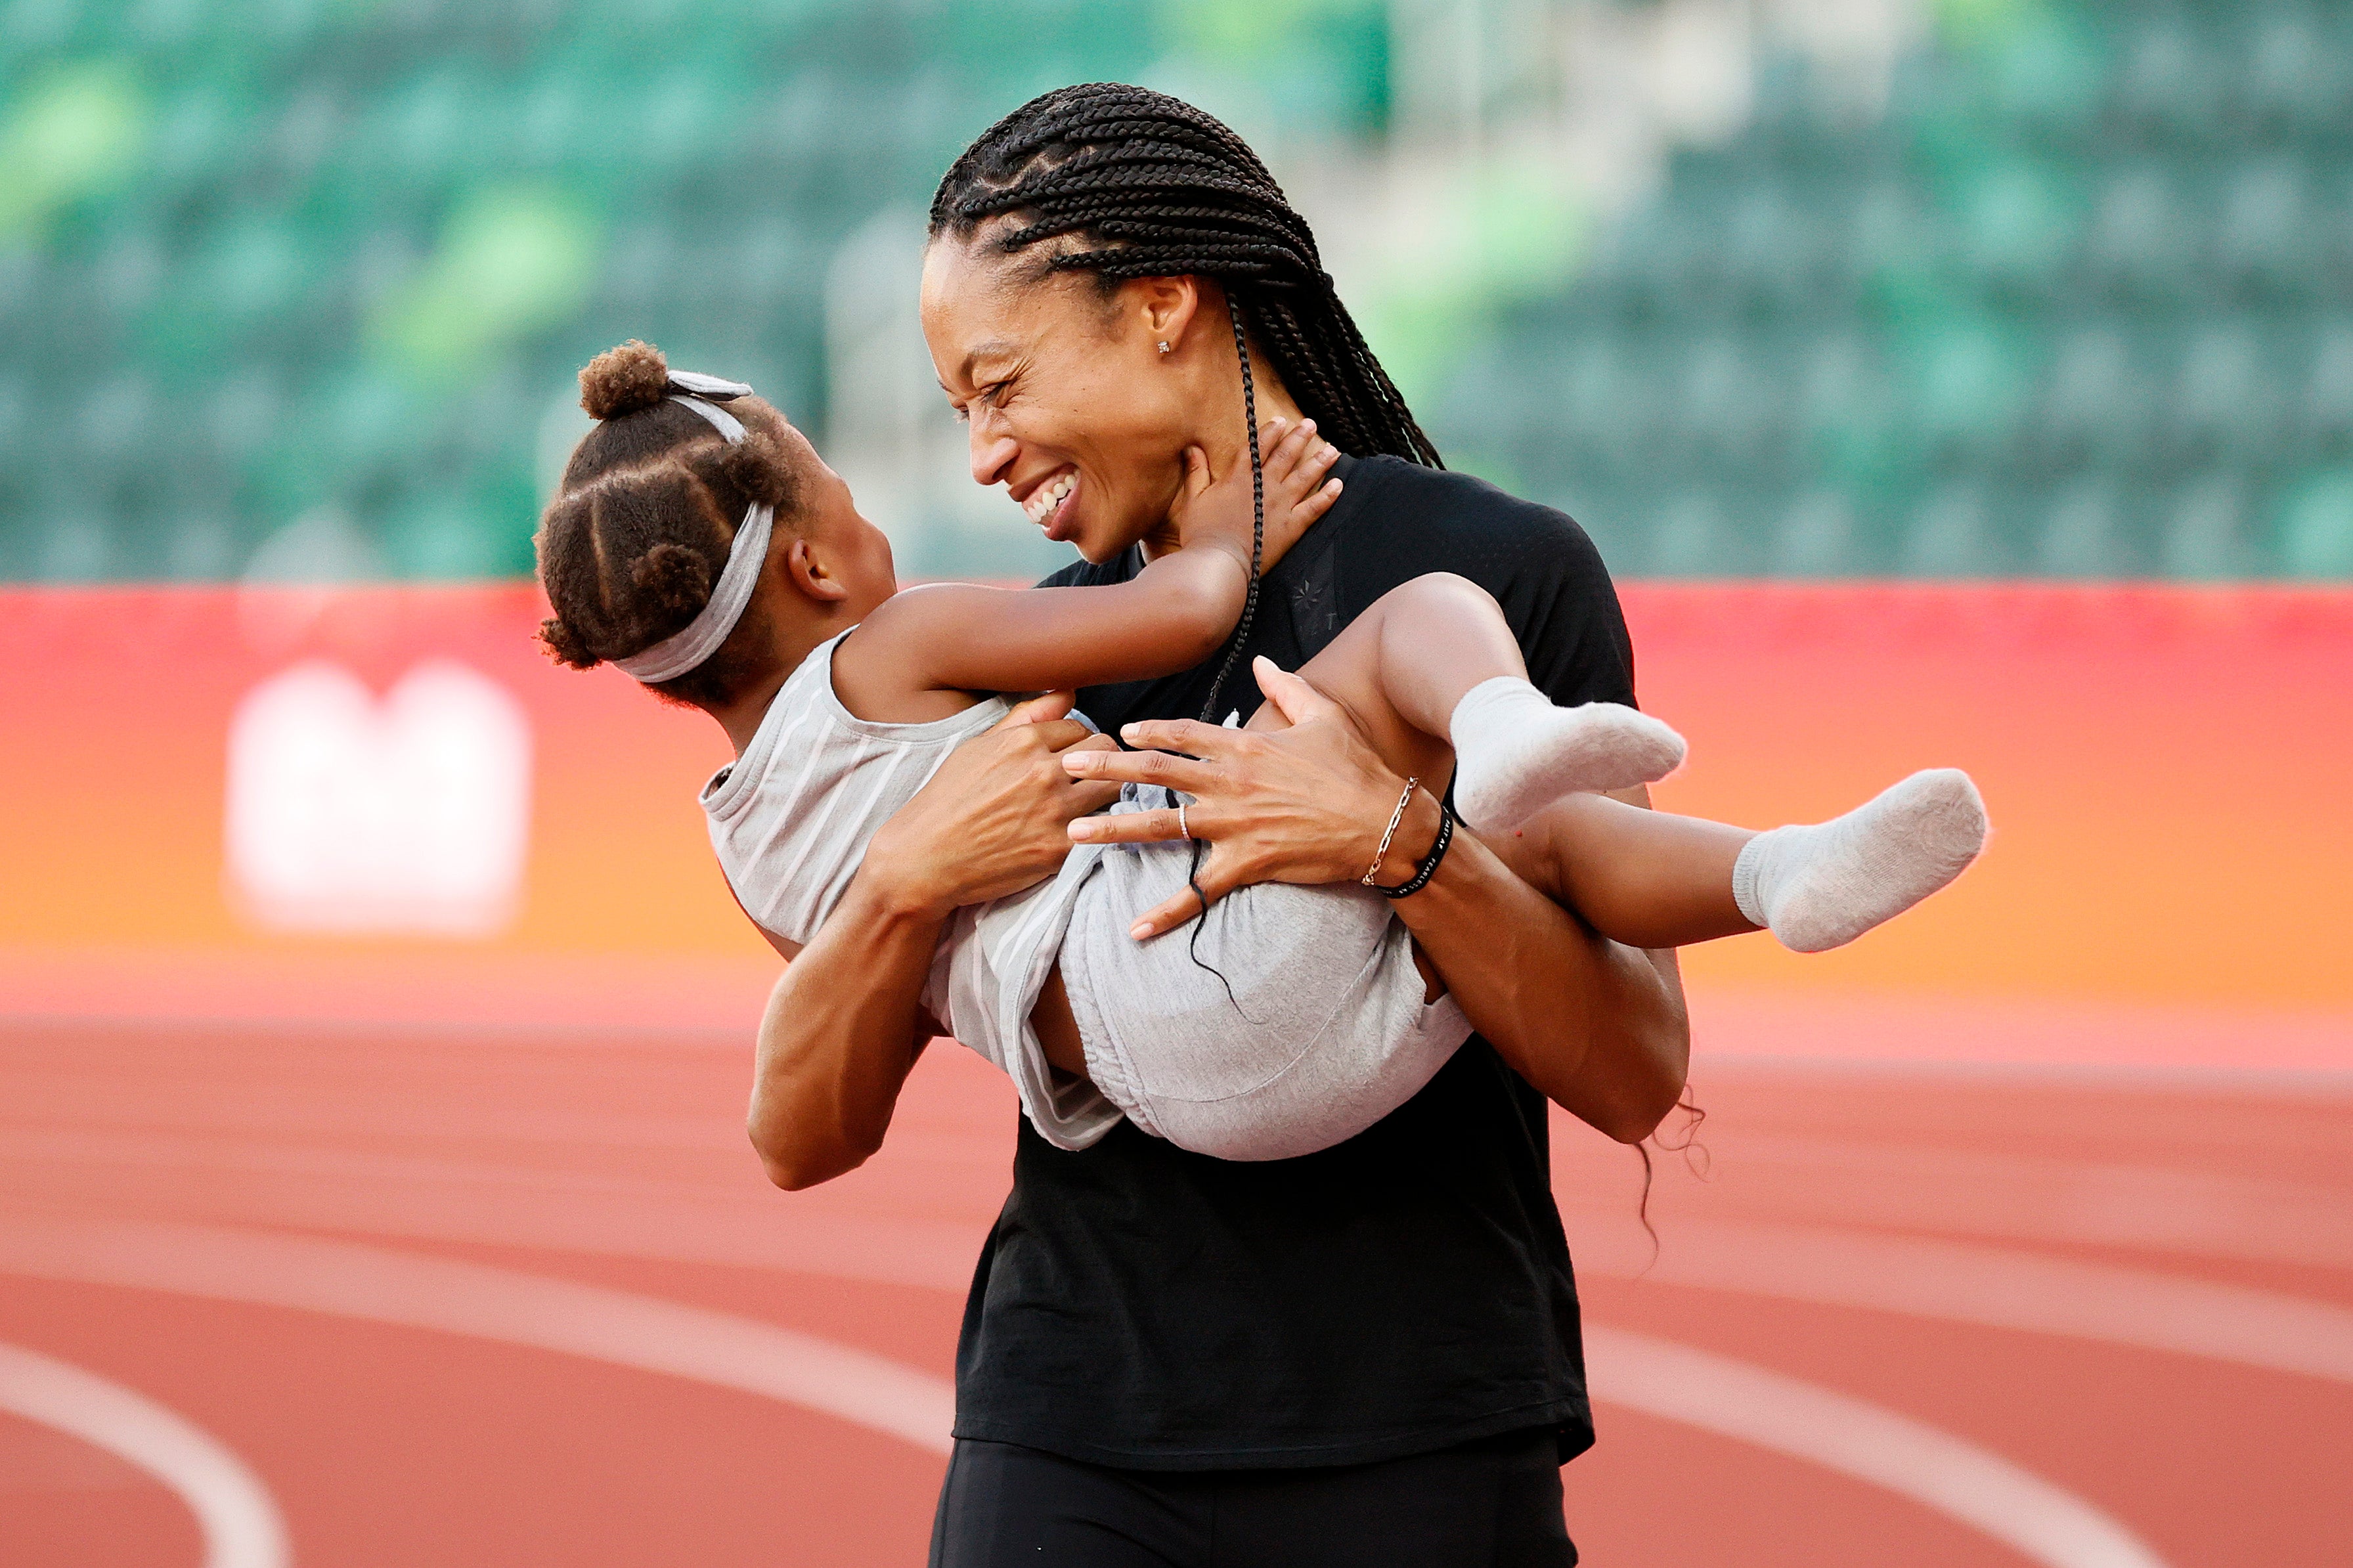 Allyson Felix has spoken about how “disrespectful” she found Nike over maternity pay despite their marketing campaigns